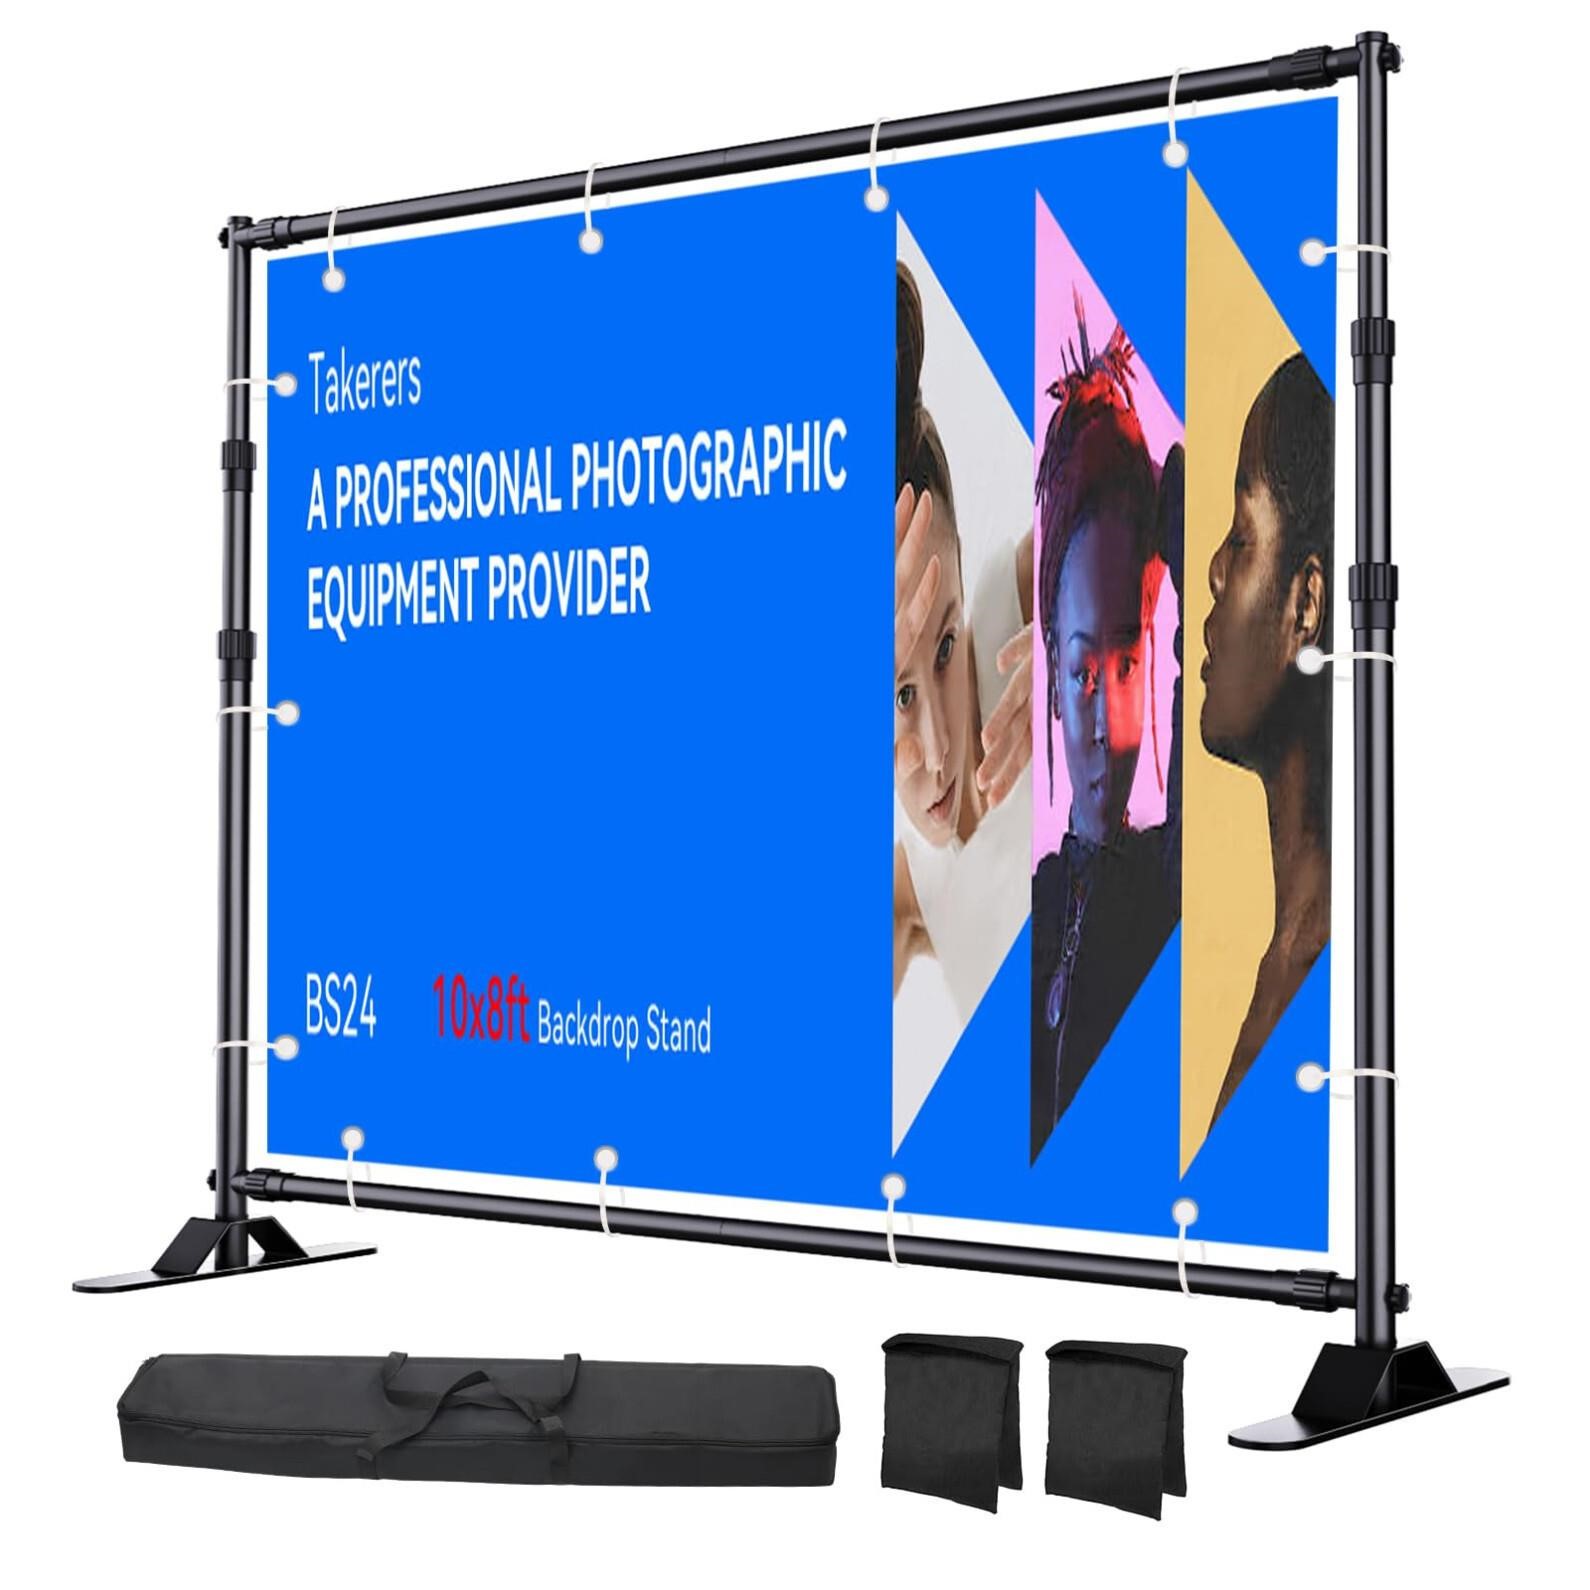 Takerers 10x8 ft Adjustable Backdrop Banner Stand